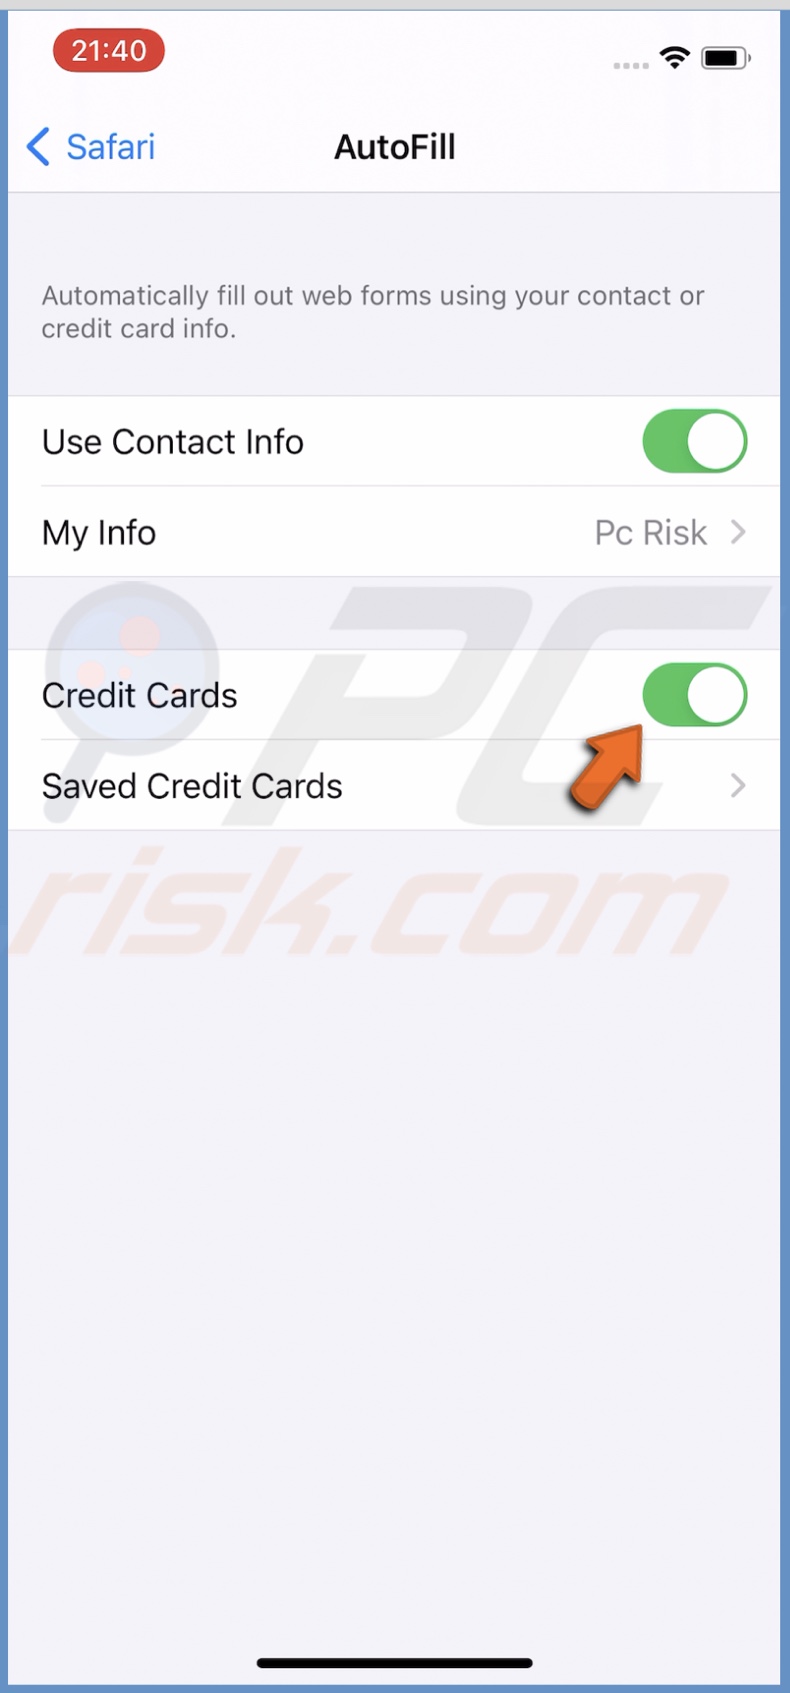 Enable Credit Cards autofill